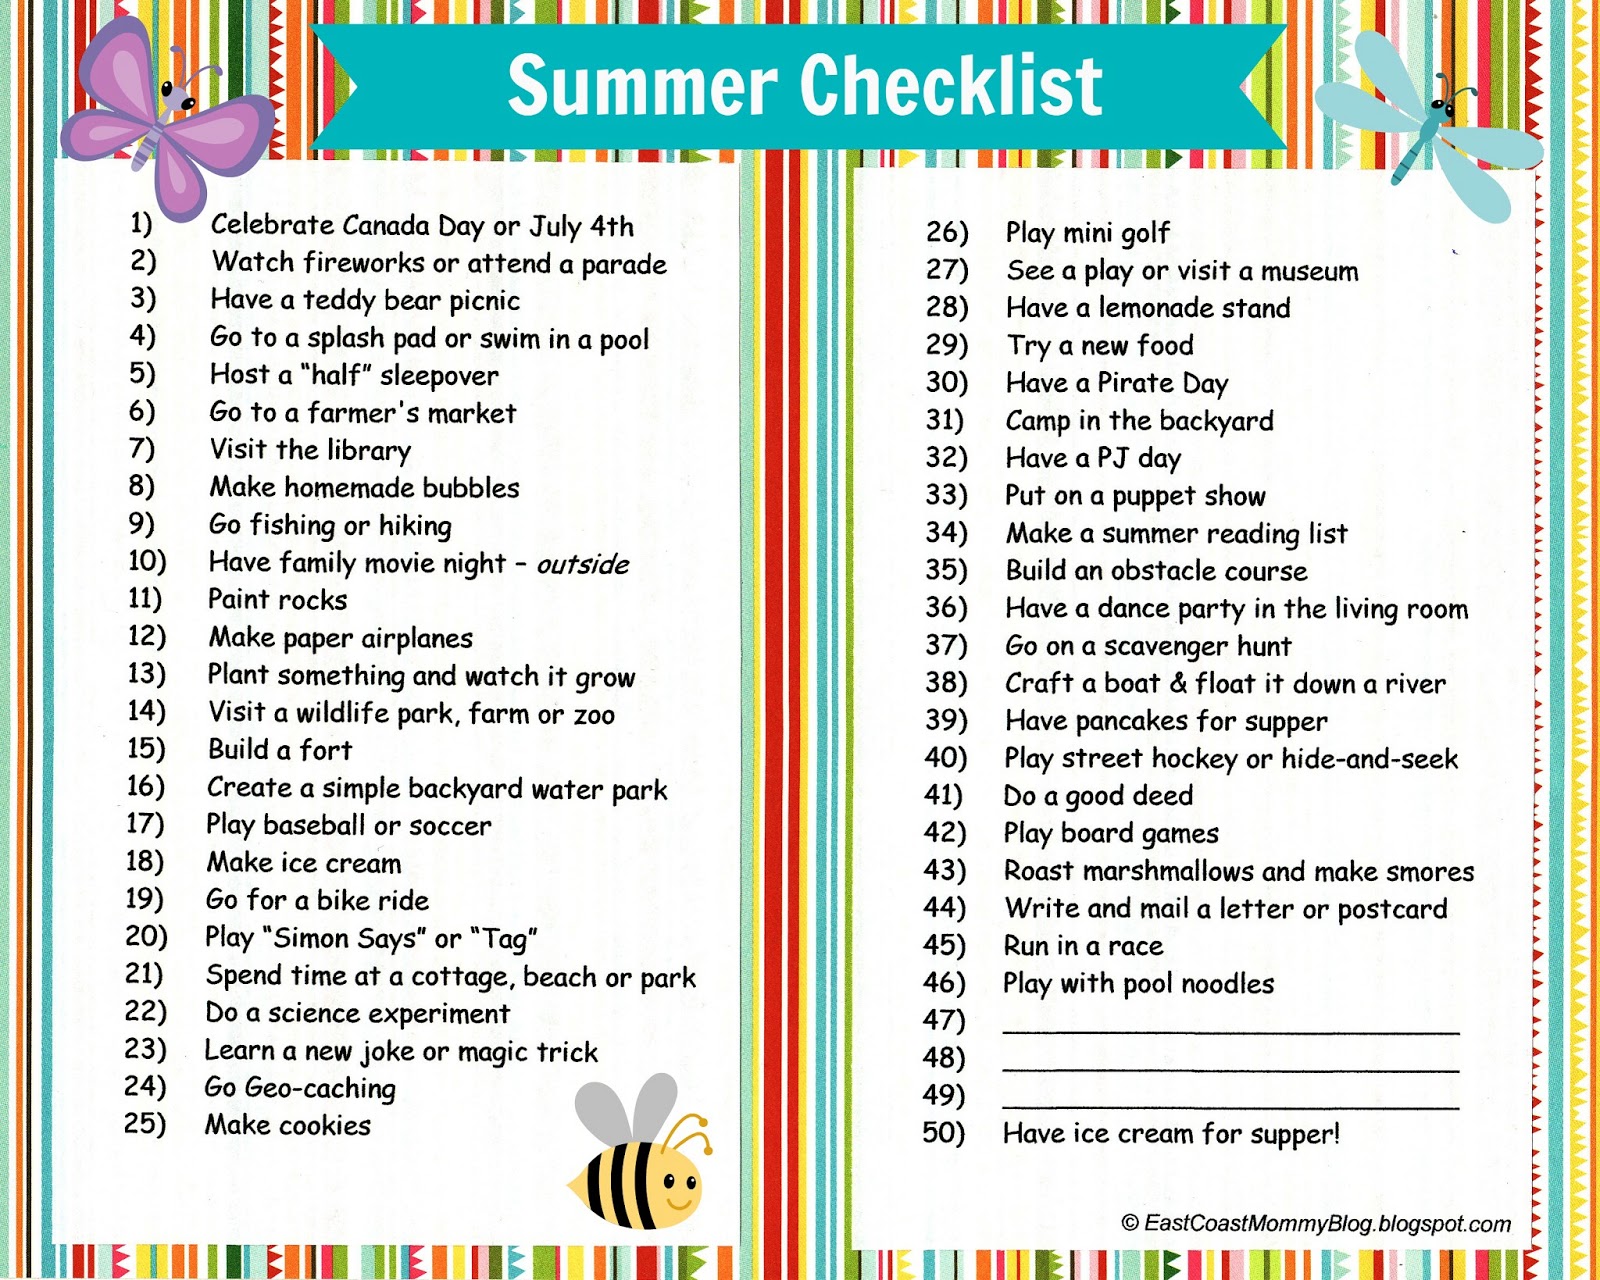 East Coast Mommy: Summer Checklist {with free printable} 2013 edition